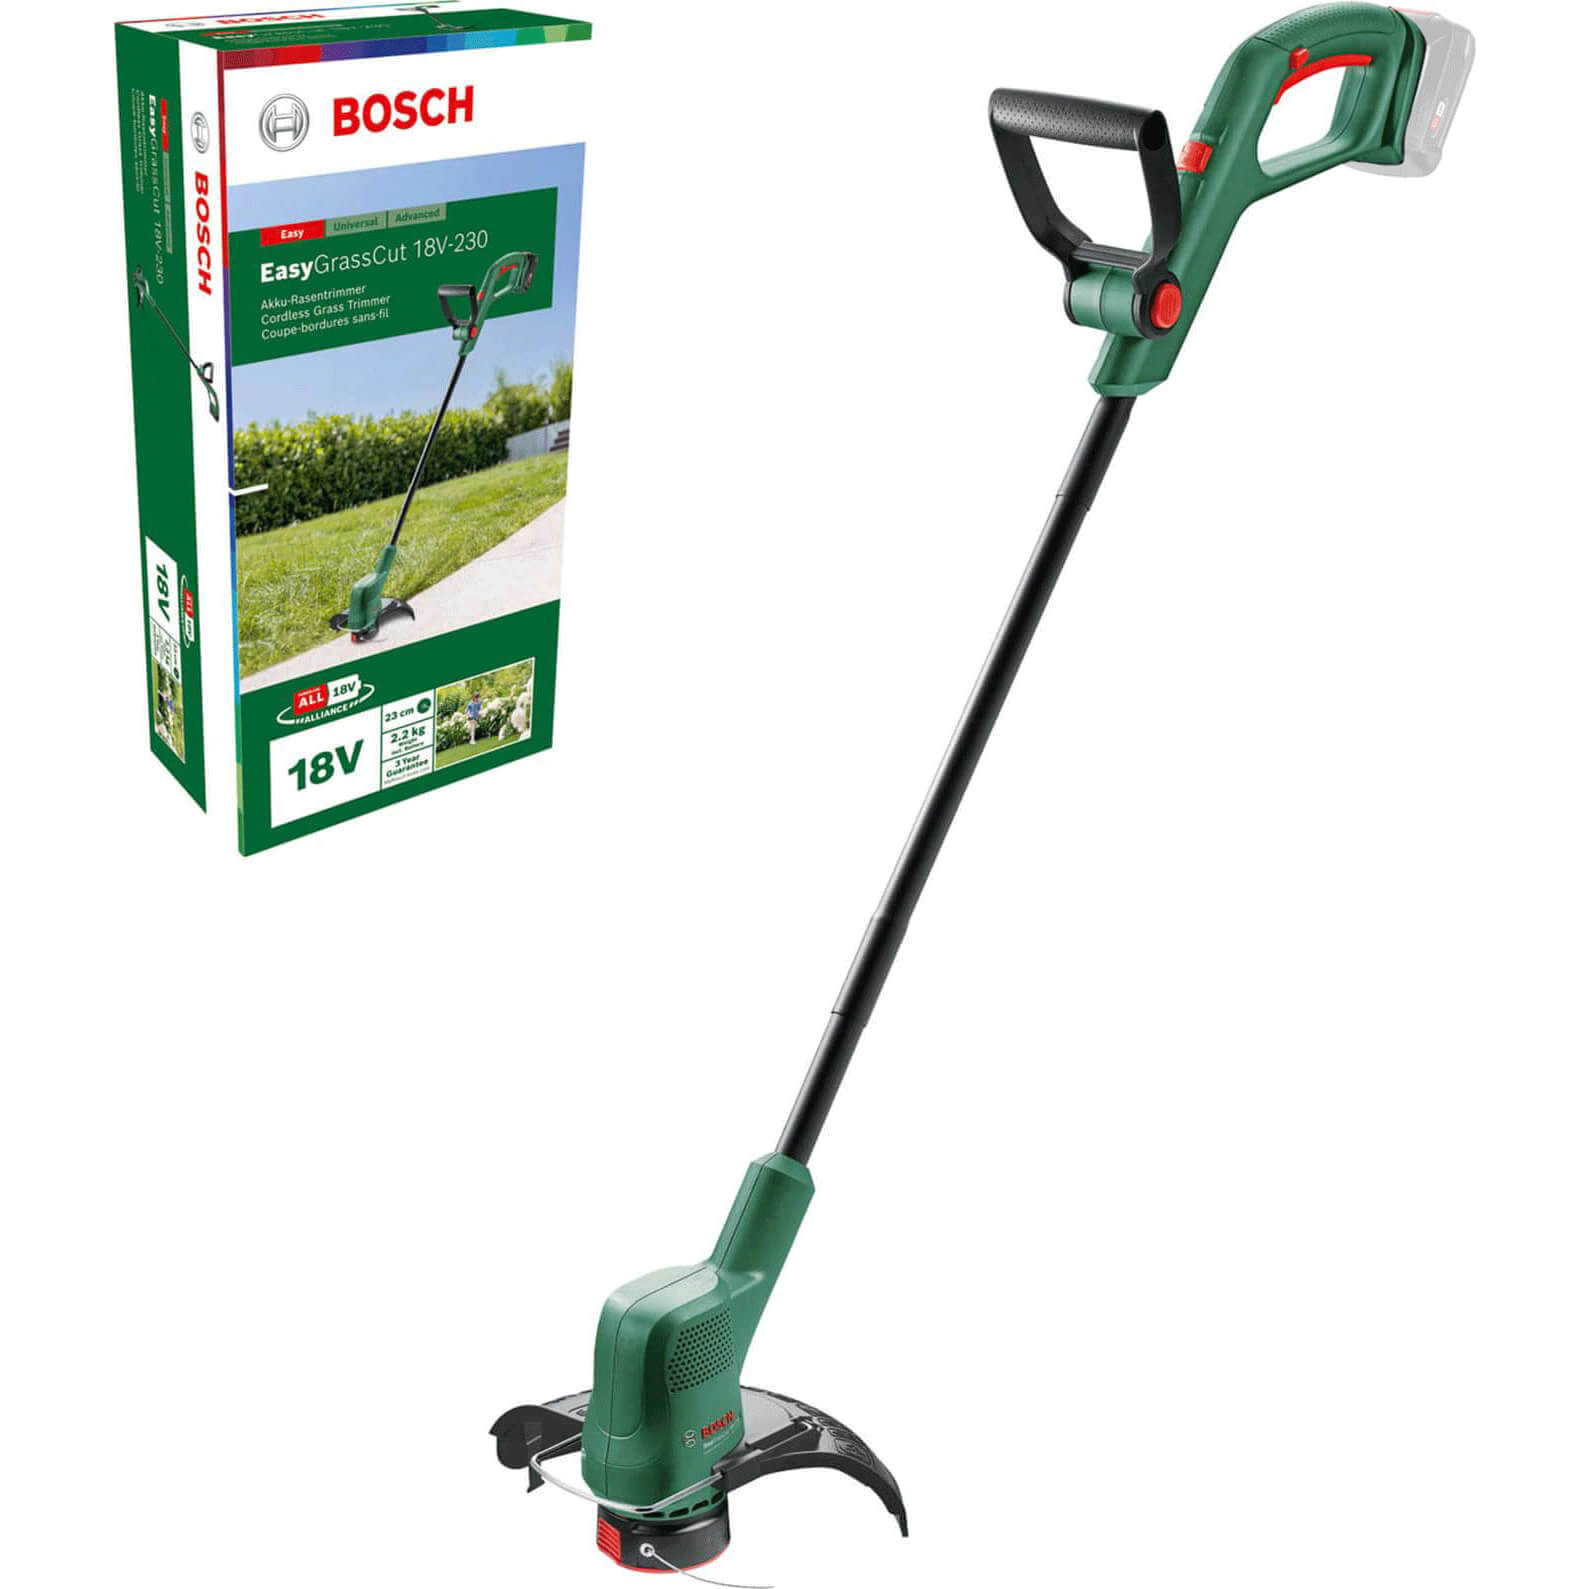 Image of Bosch EASYGRASSCUT 18V-230 18v Cordless Grass Trimmer and Edger 230mm No Batteries No Charger